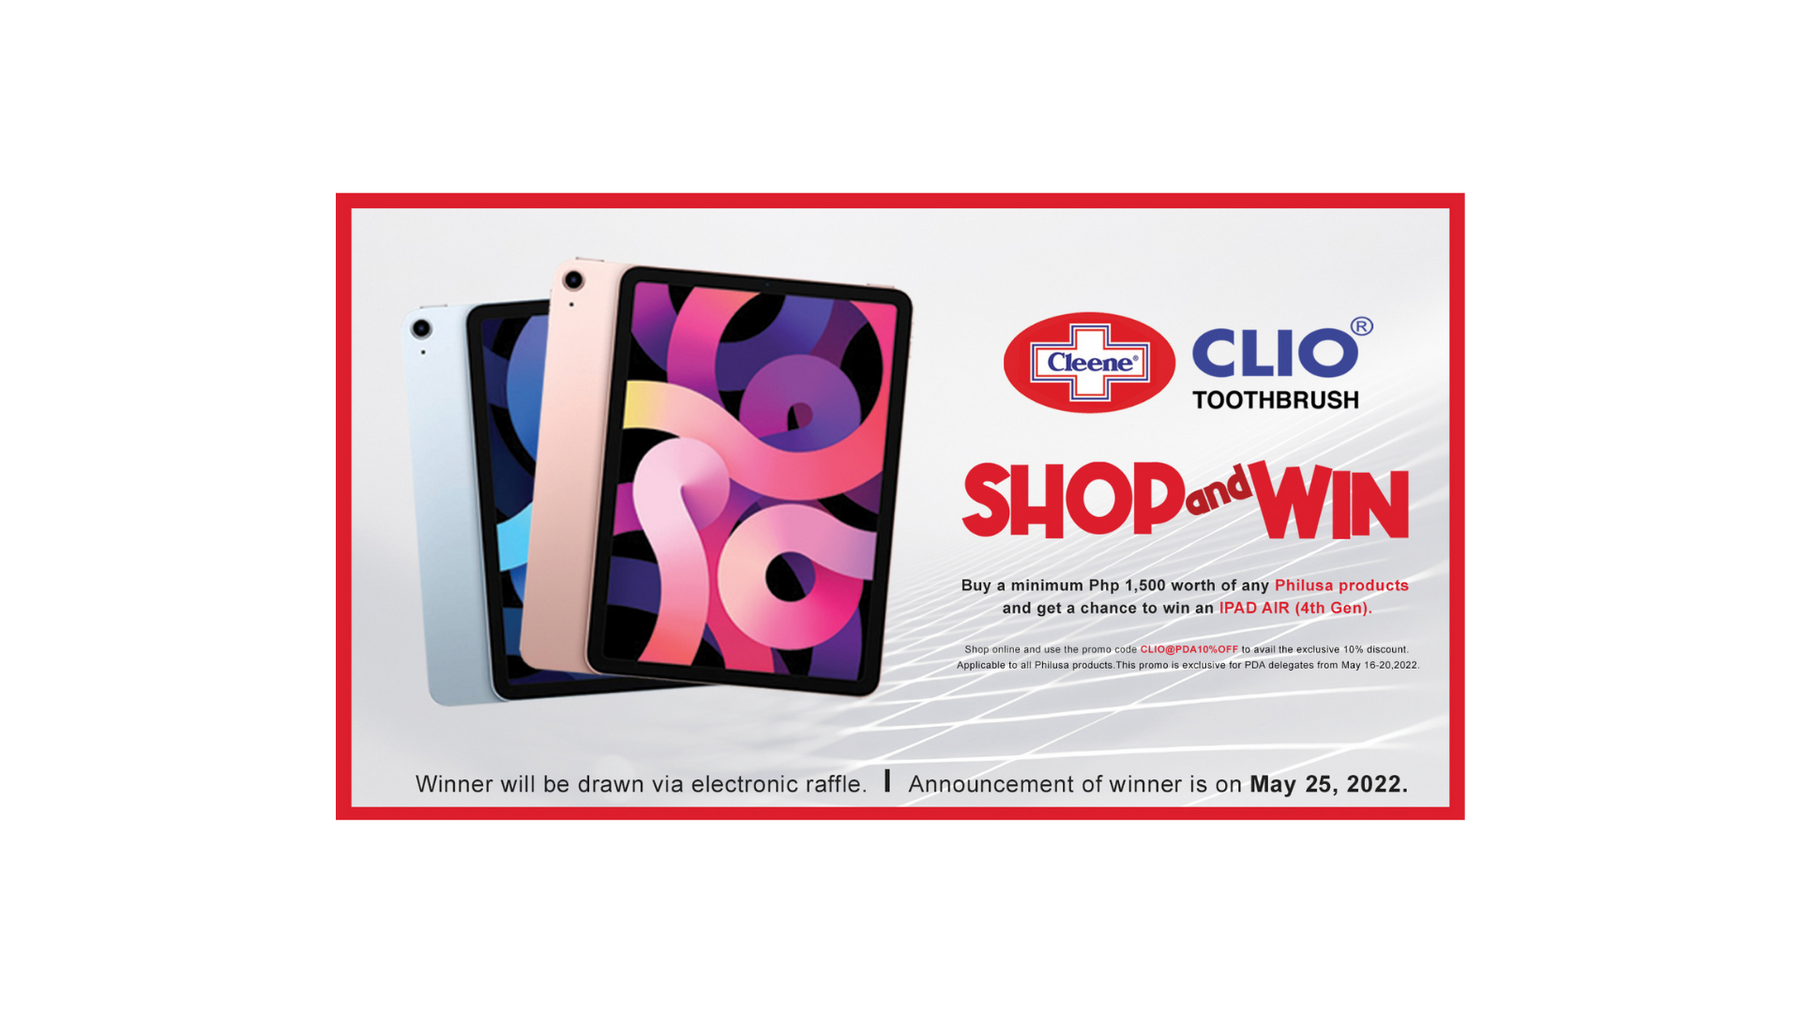 CLIO x PDA "SHOP and WIN" Exclusive promotion